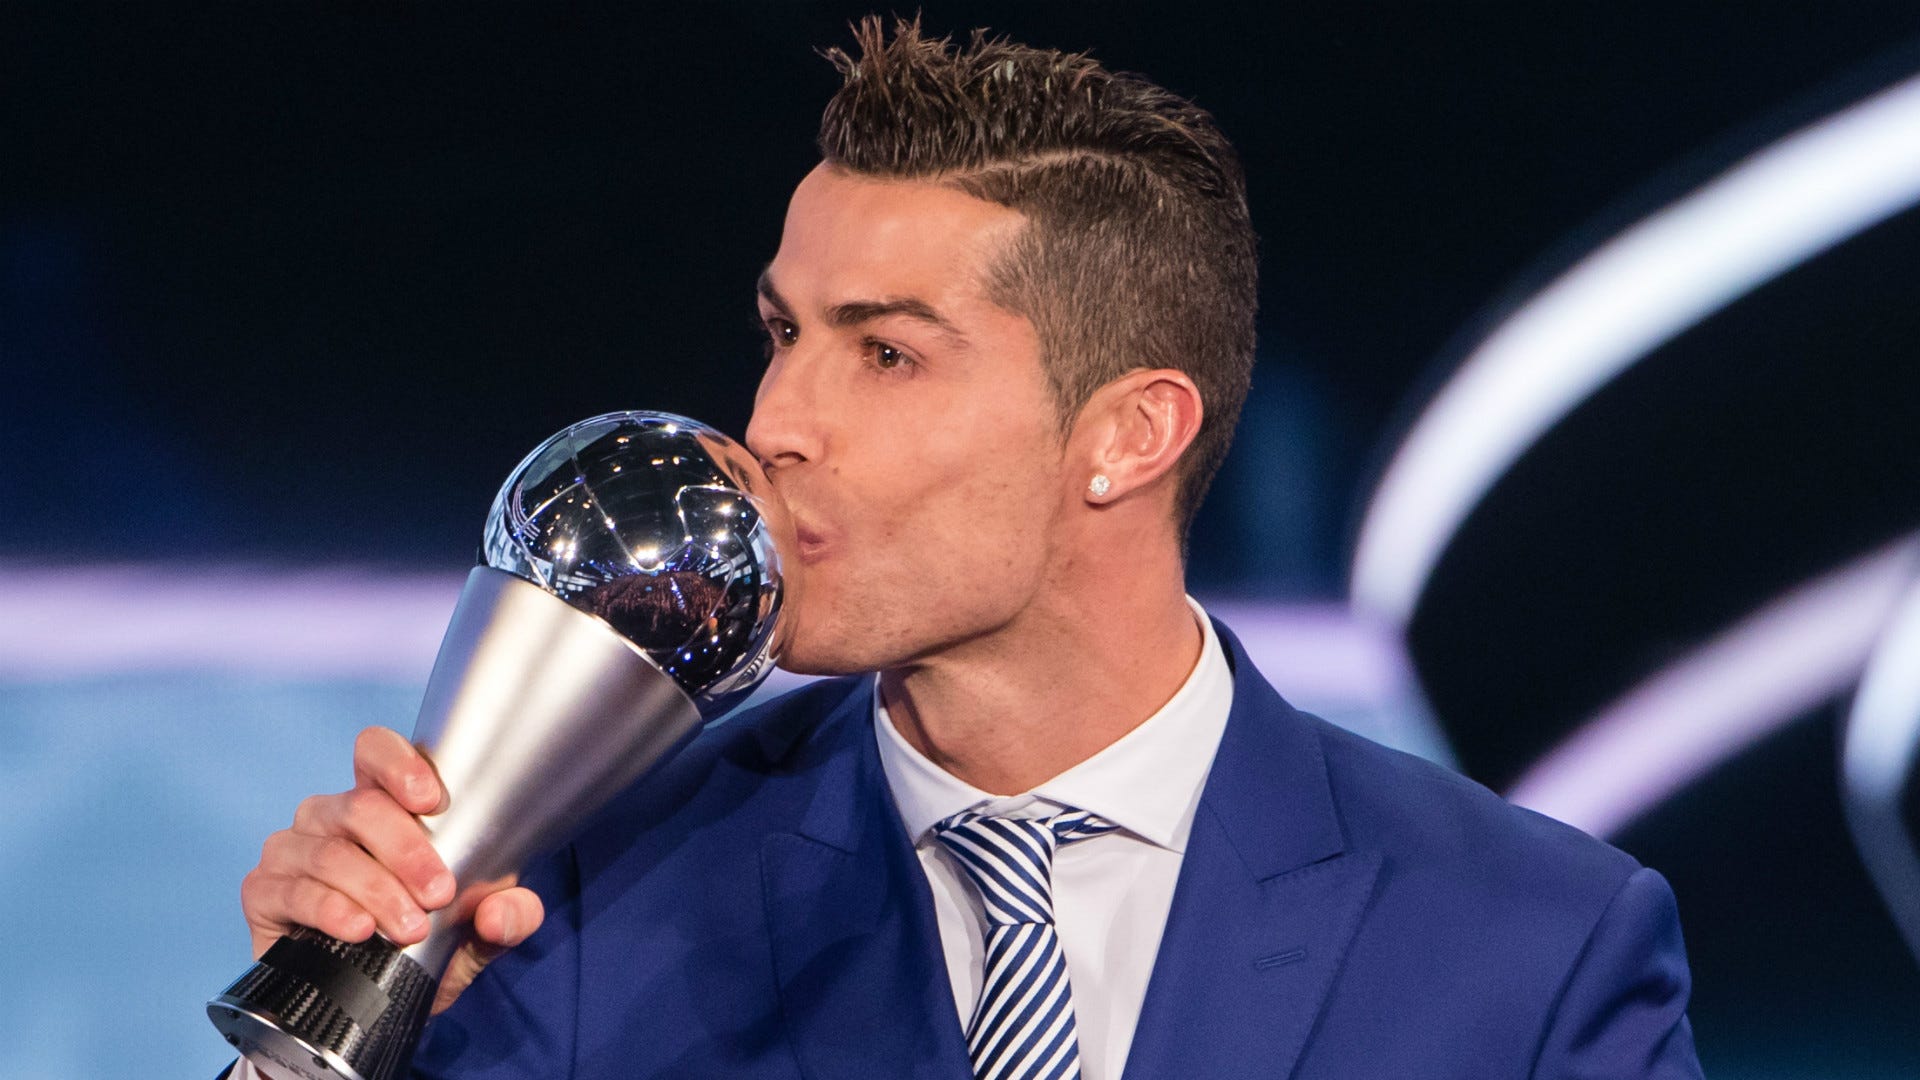 Cristiano Ronaldo makes a bold claim about his worth as a player